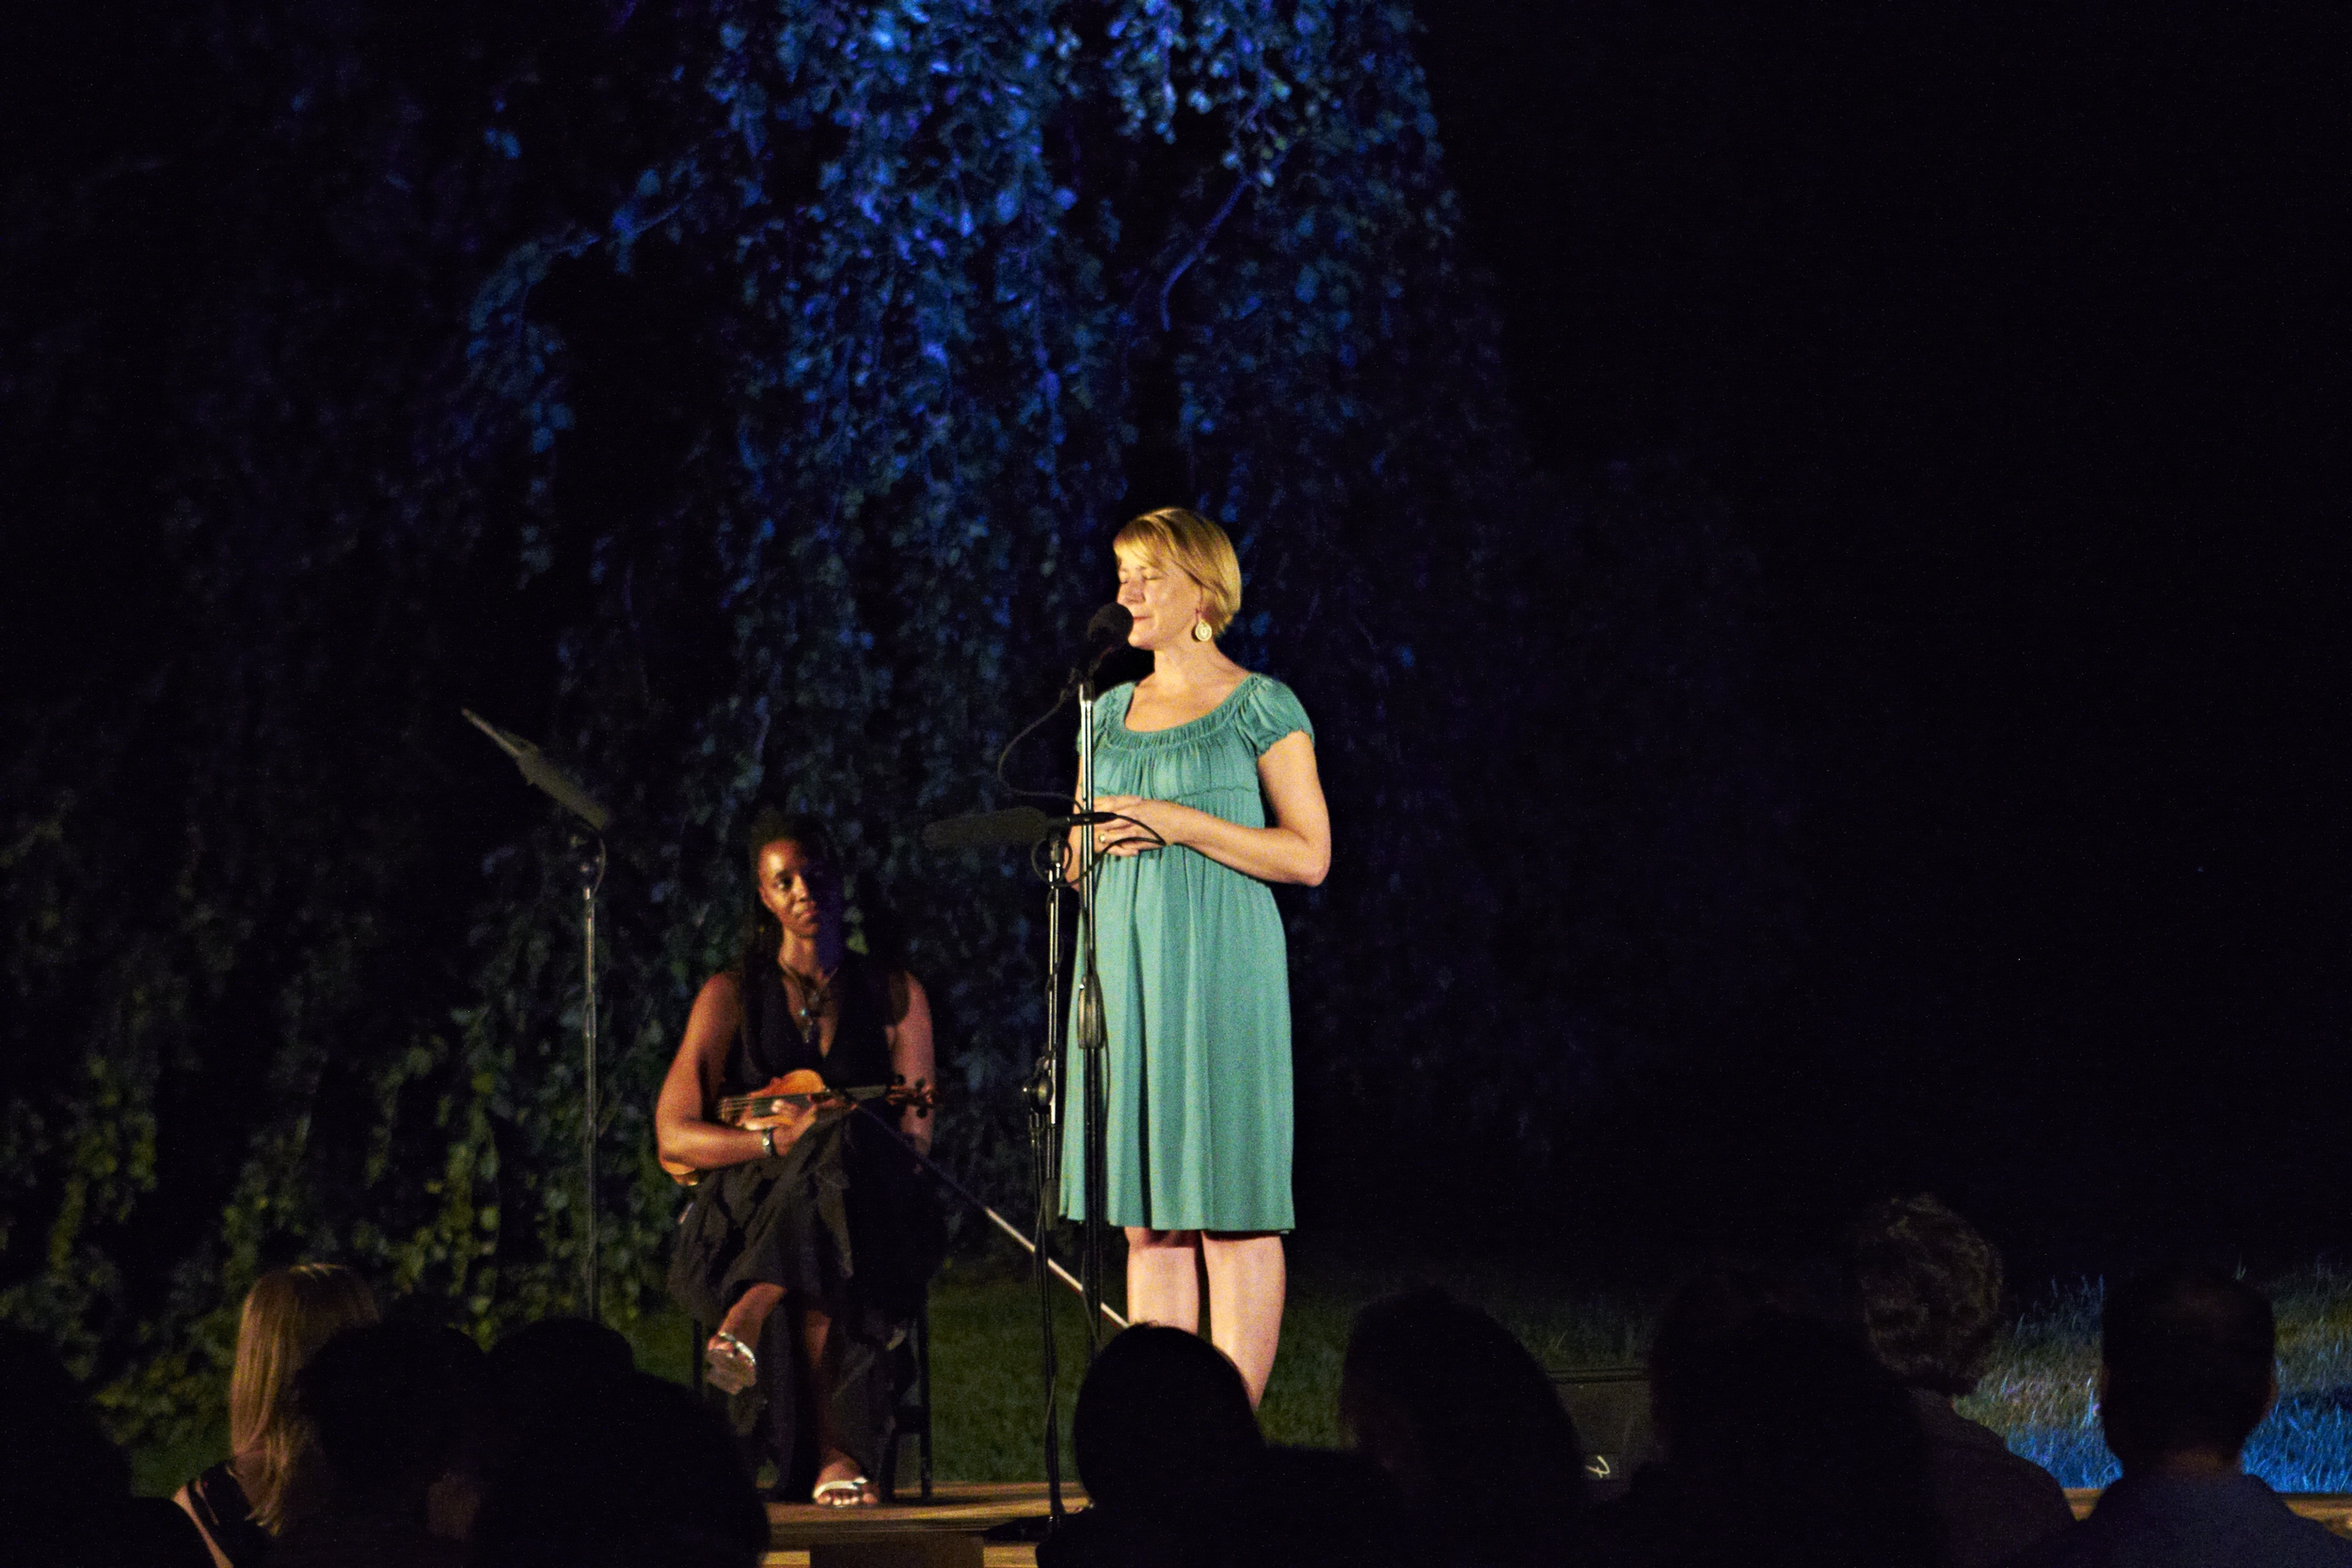 Lighting and audio for an outdoor storytelling event 